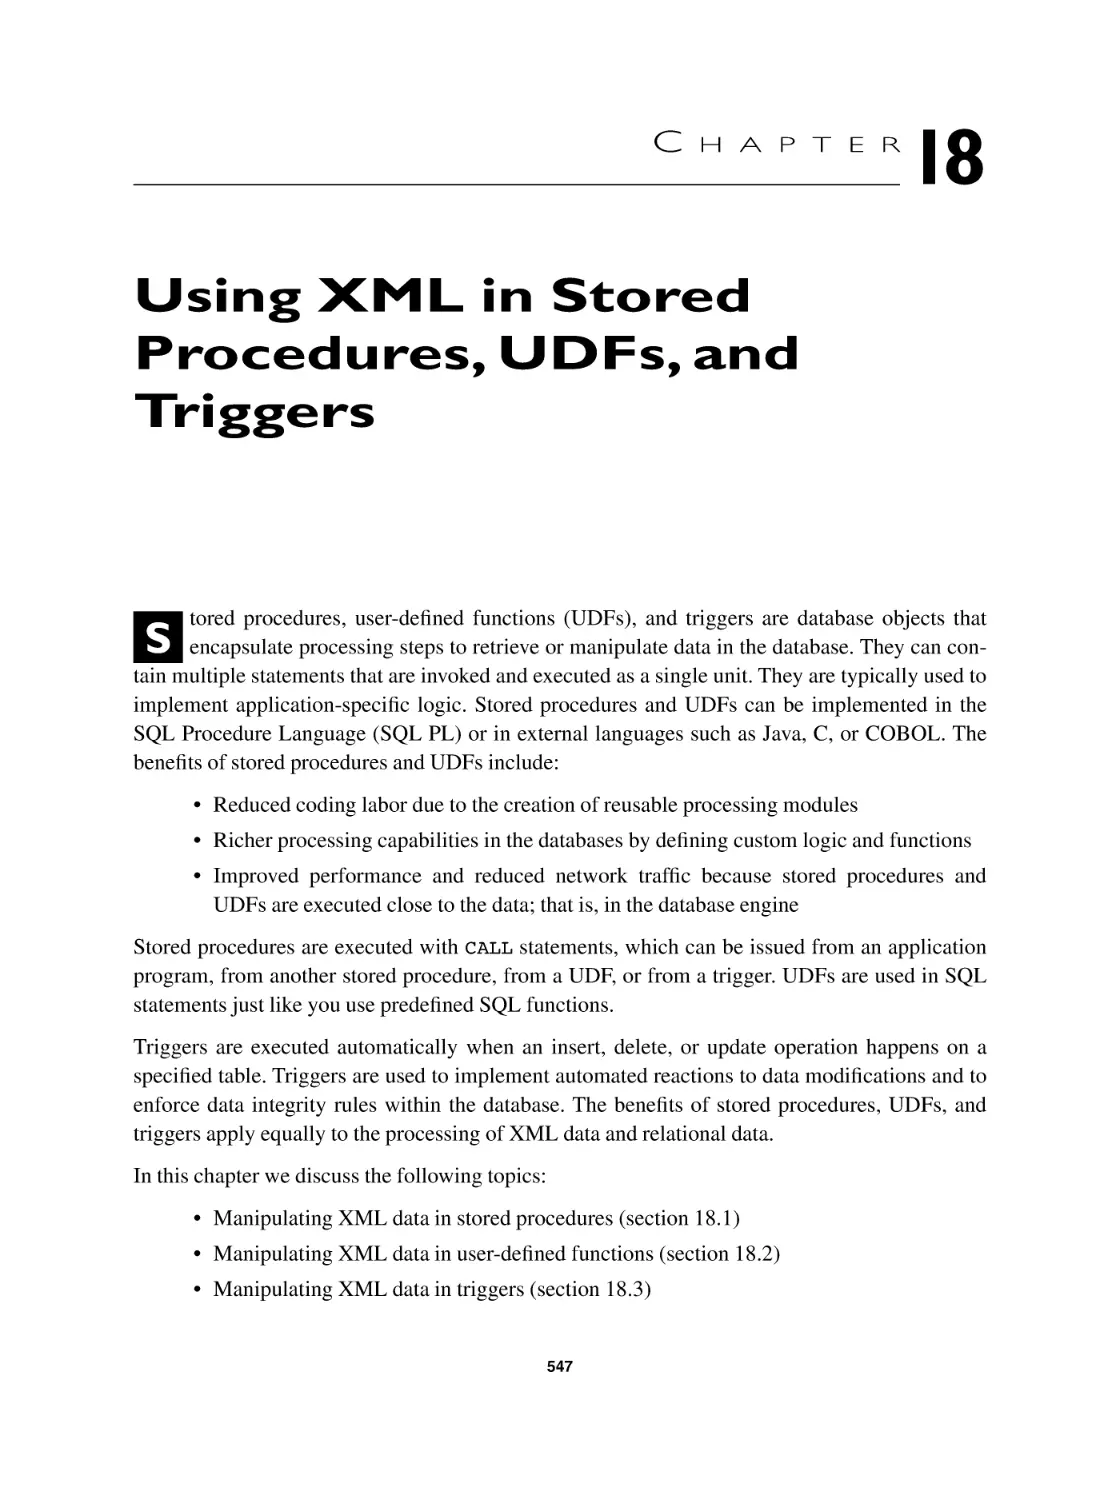 Chapter 18 Using XML in Stored Procedures, UDFs, and Triggers